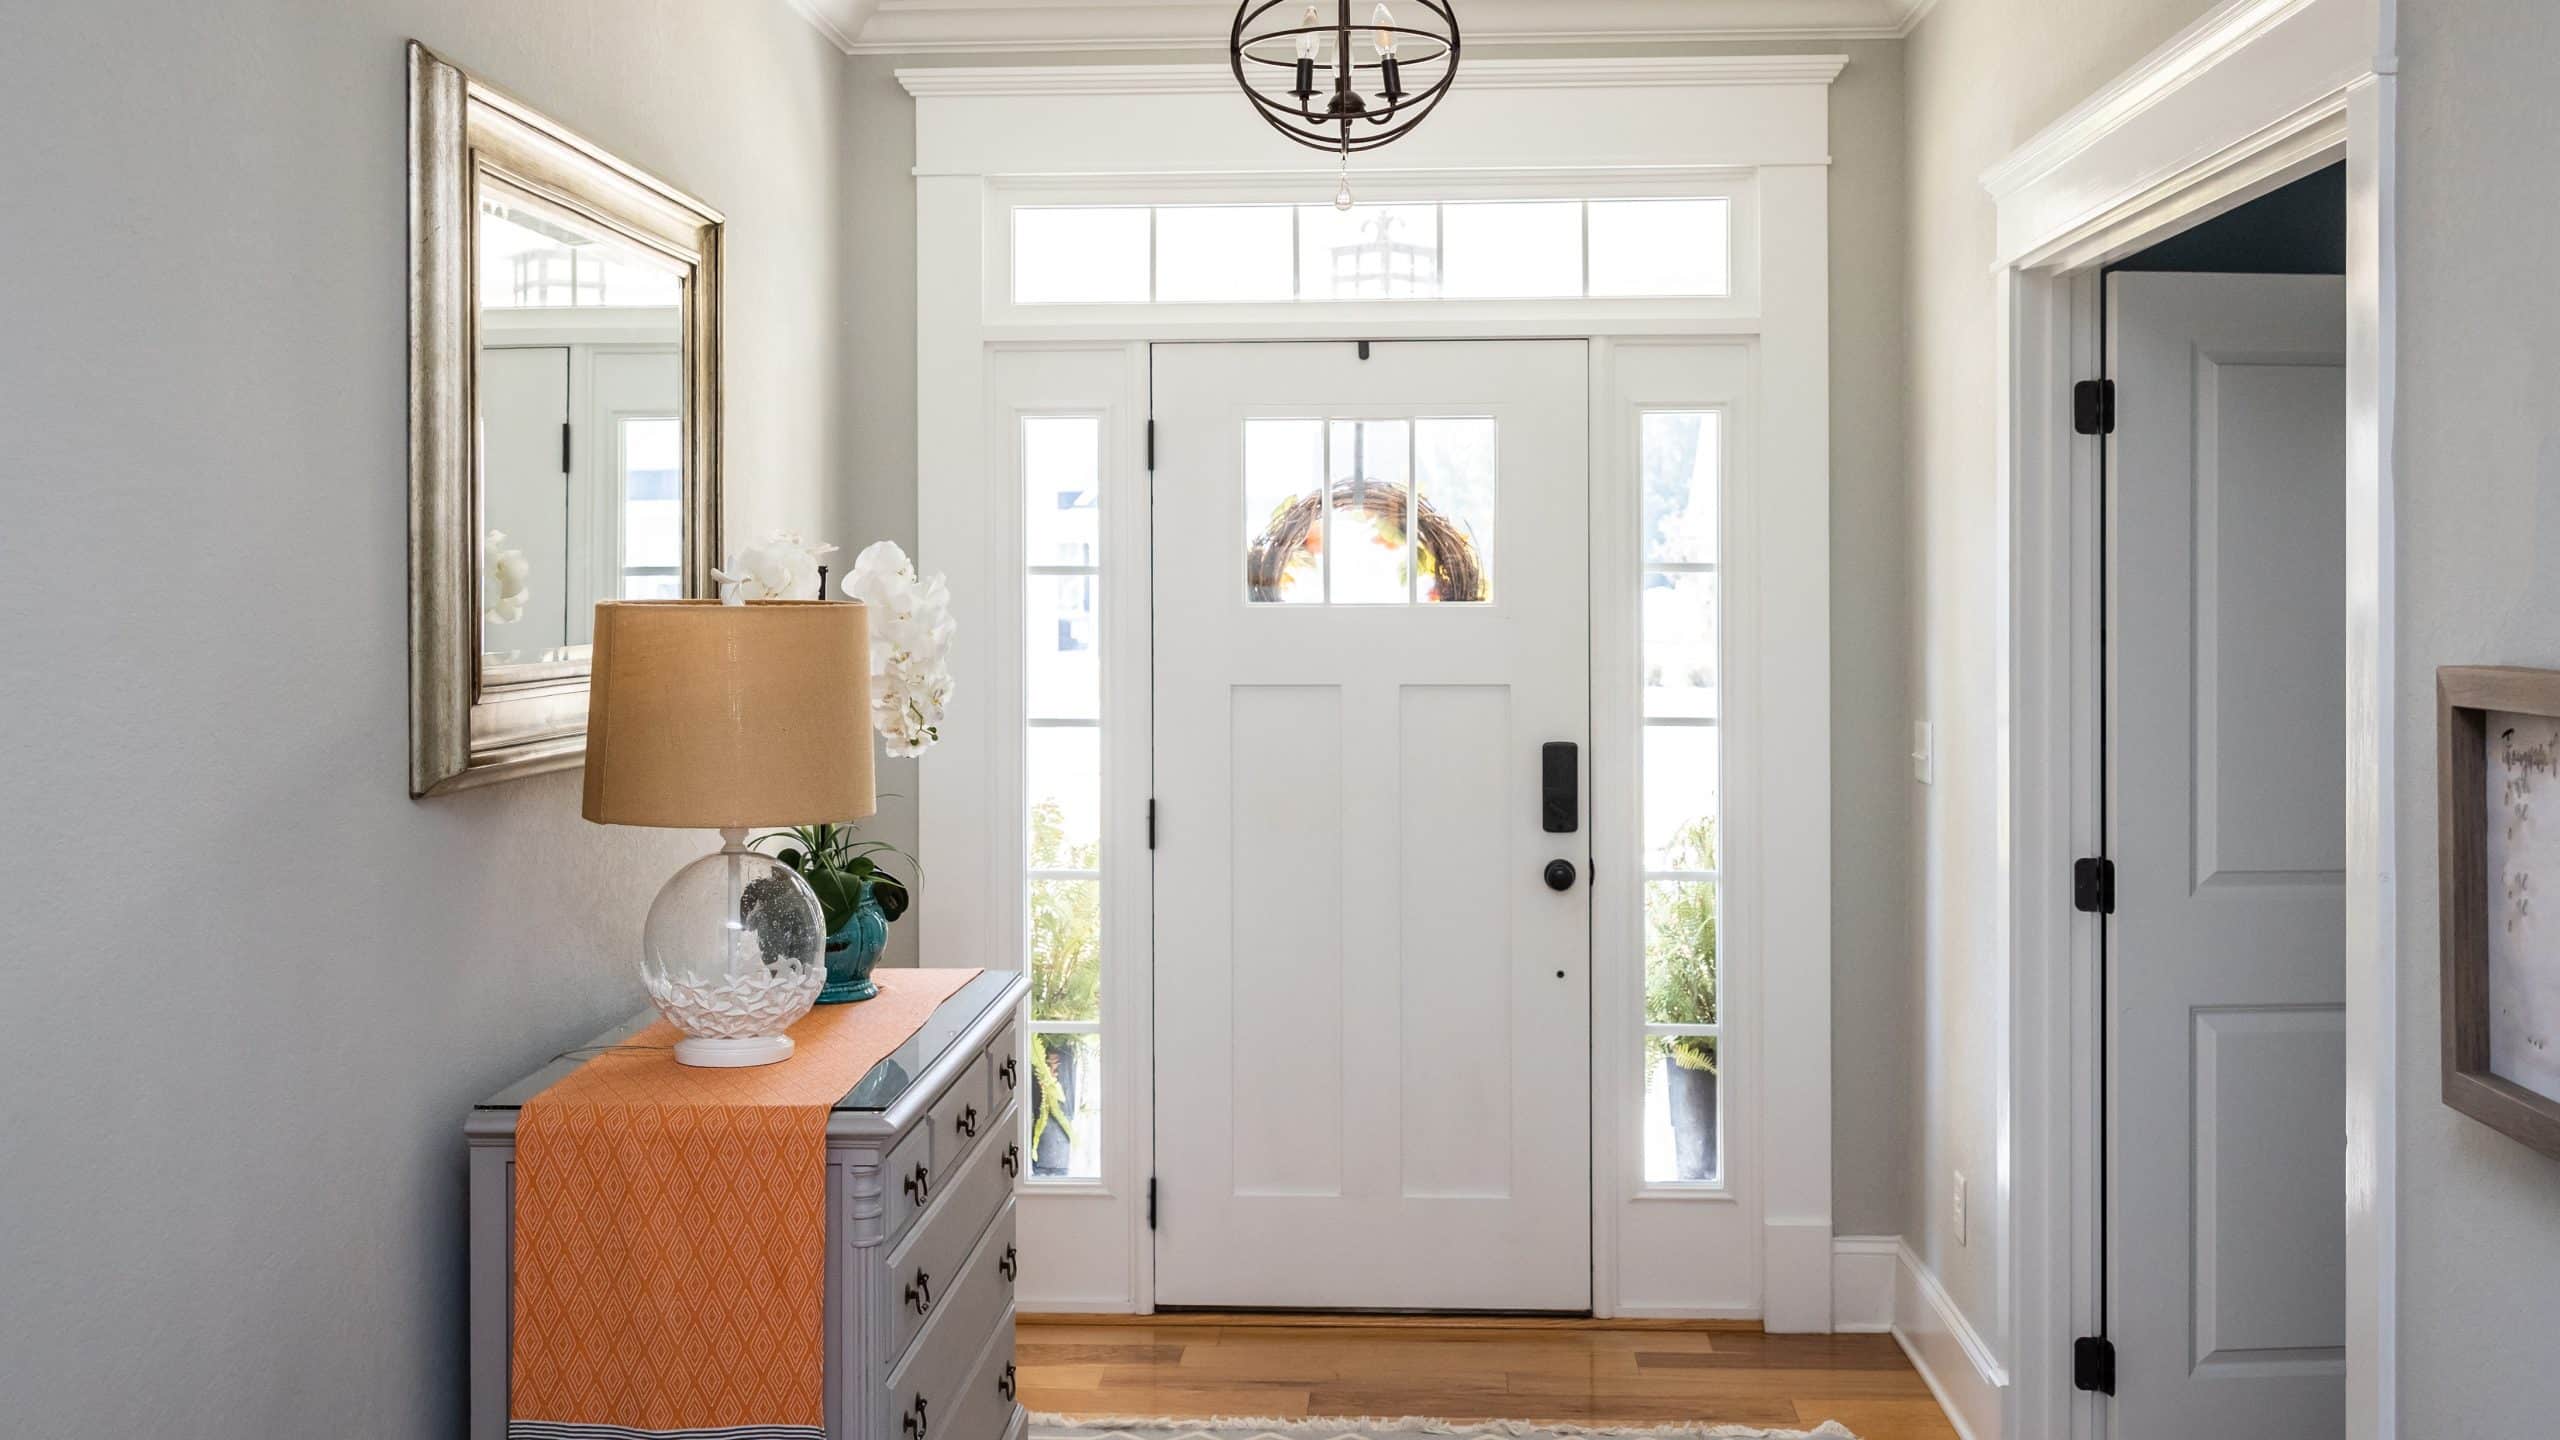 Interior view of a white entry door with sidelights and a transom